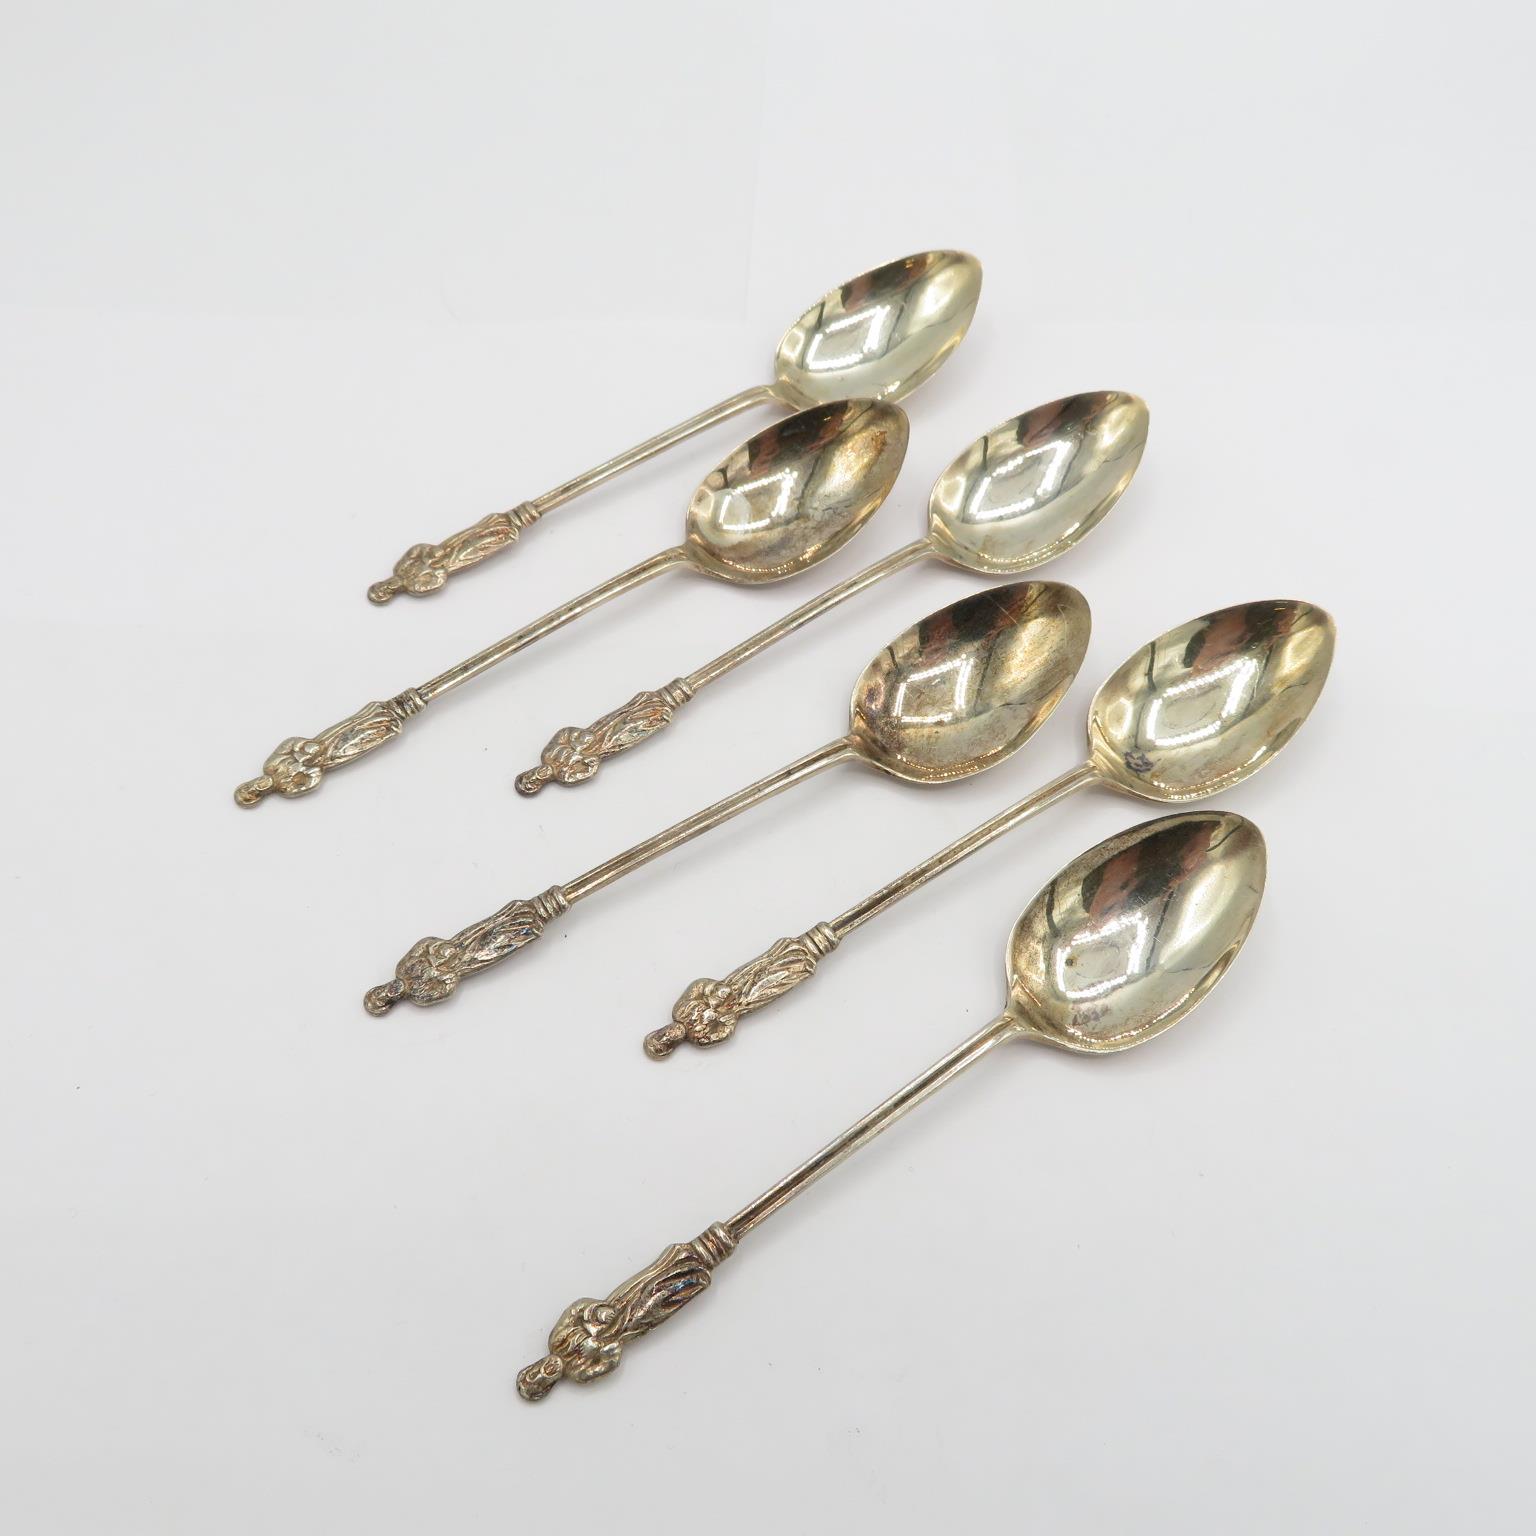 112g HM silver spoons - Image 4 of 4